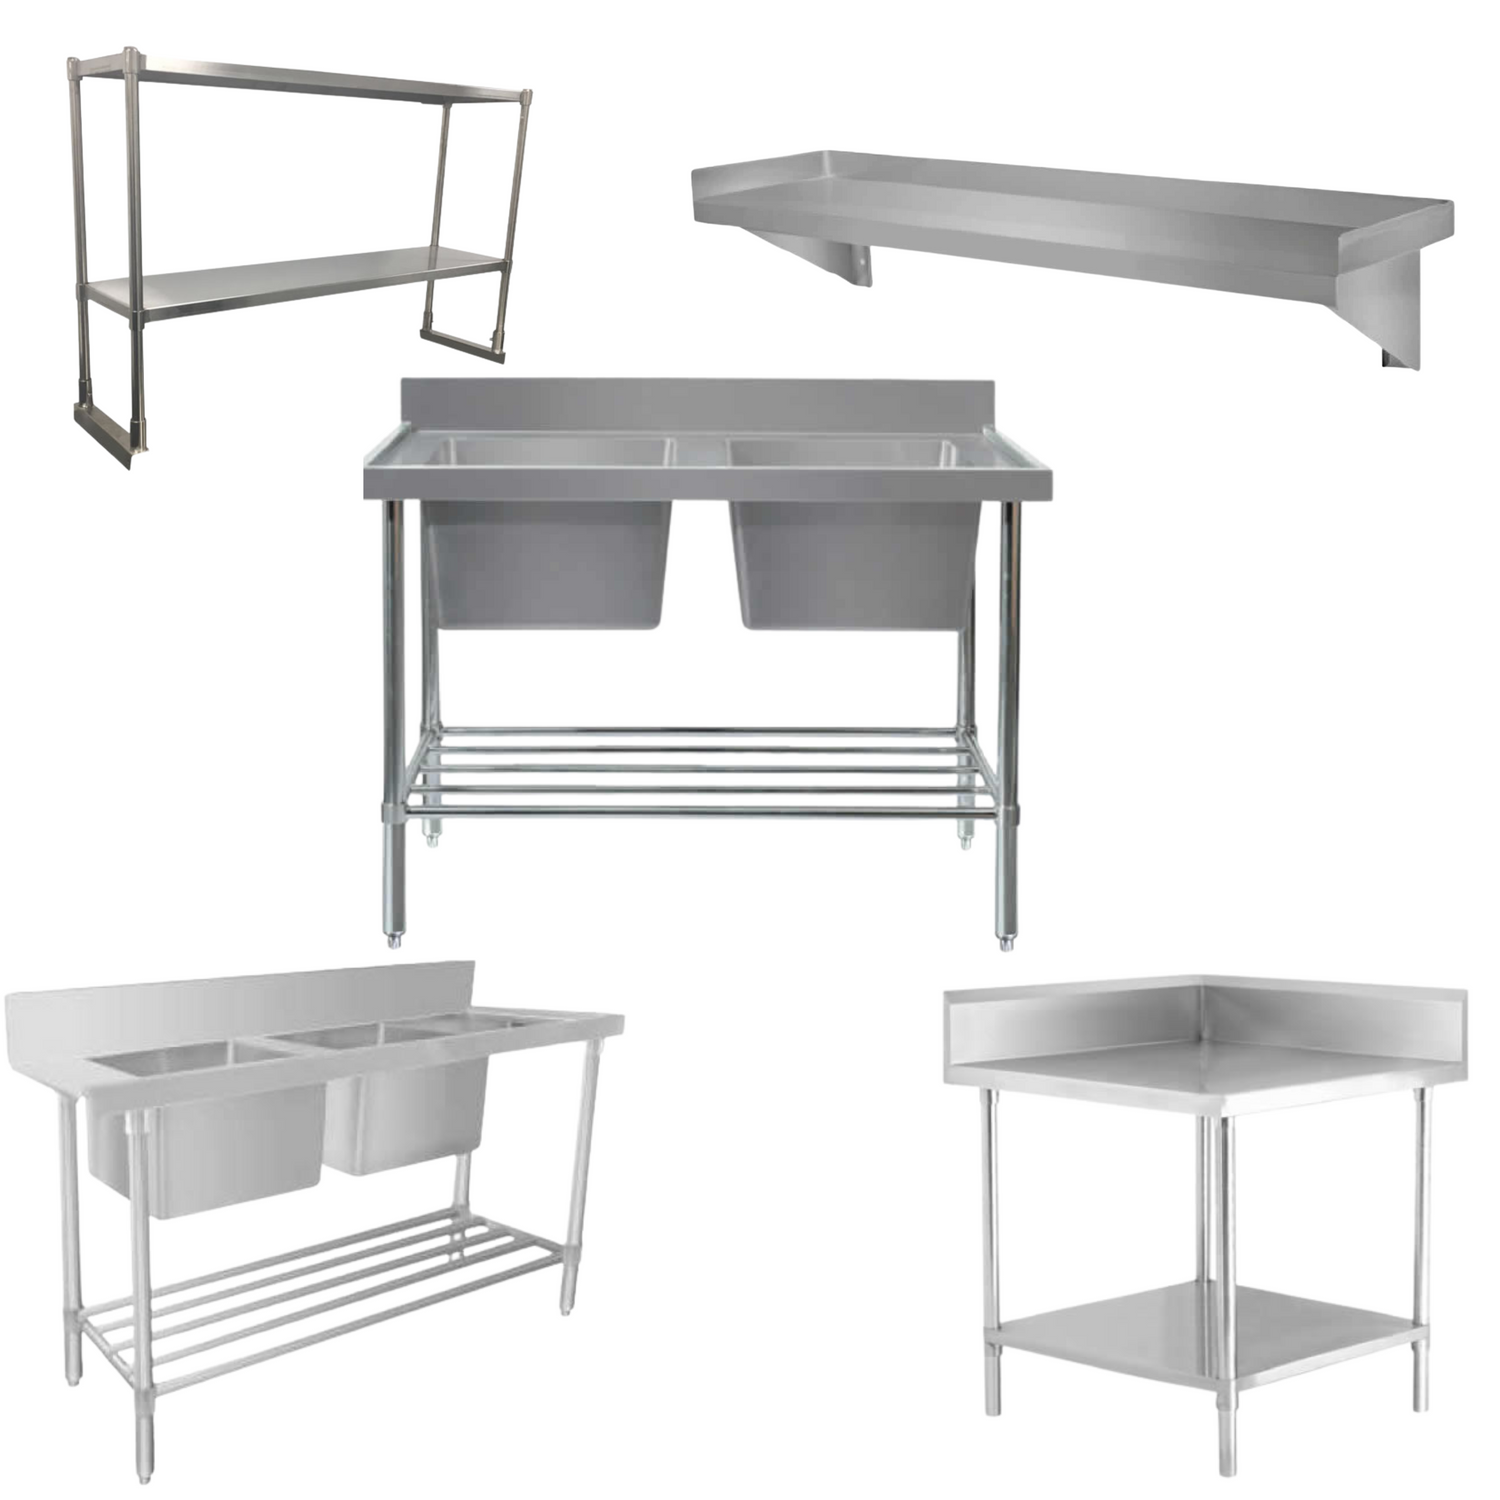 Commercial Storage And Workbench Range